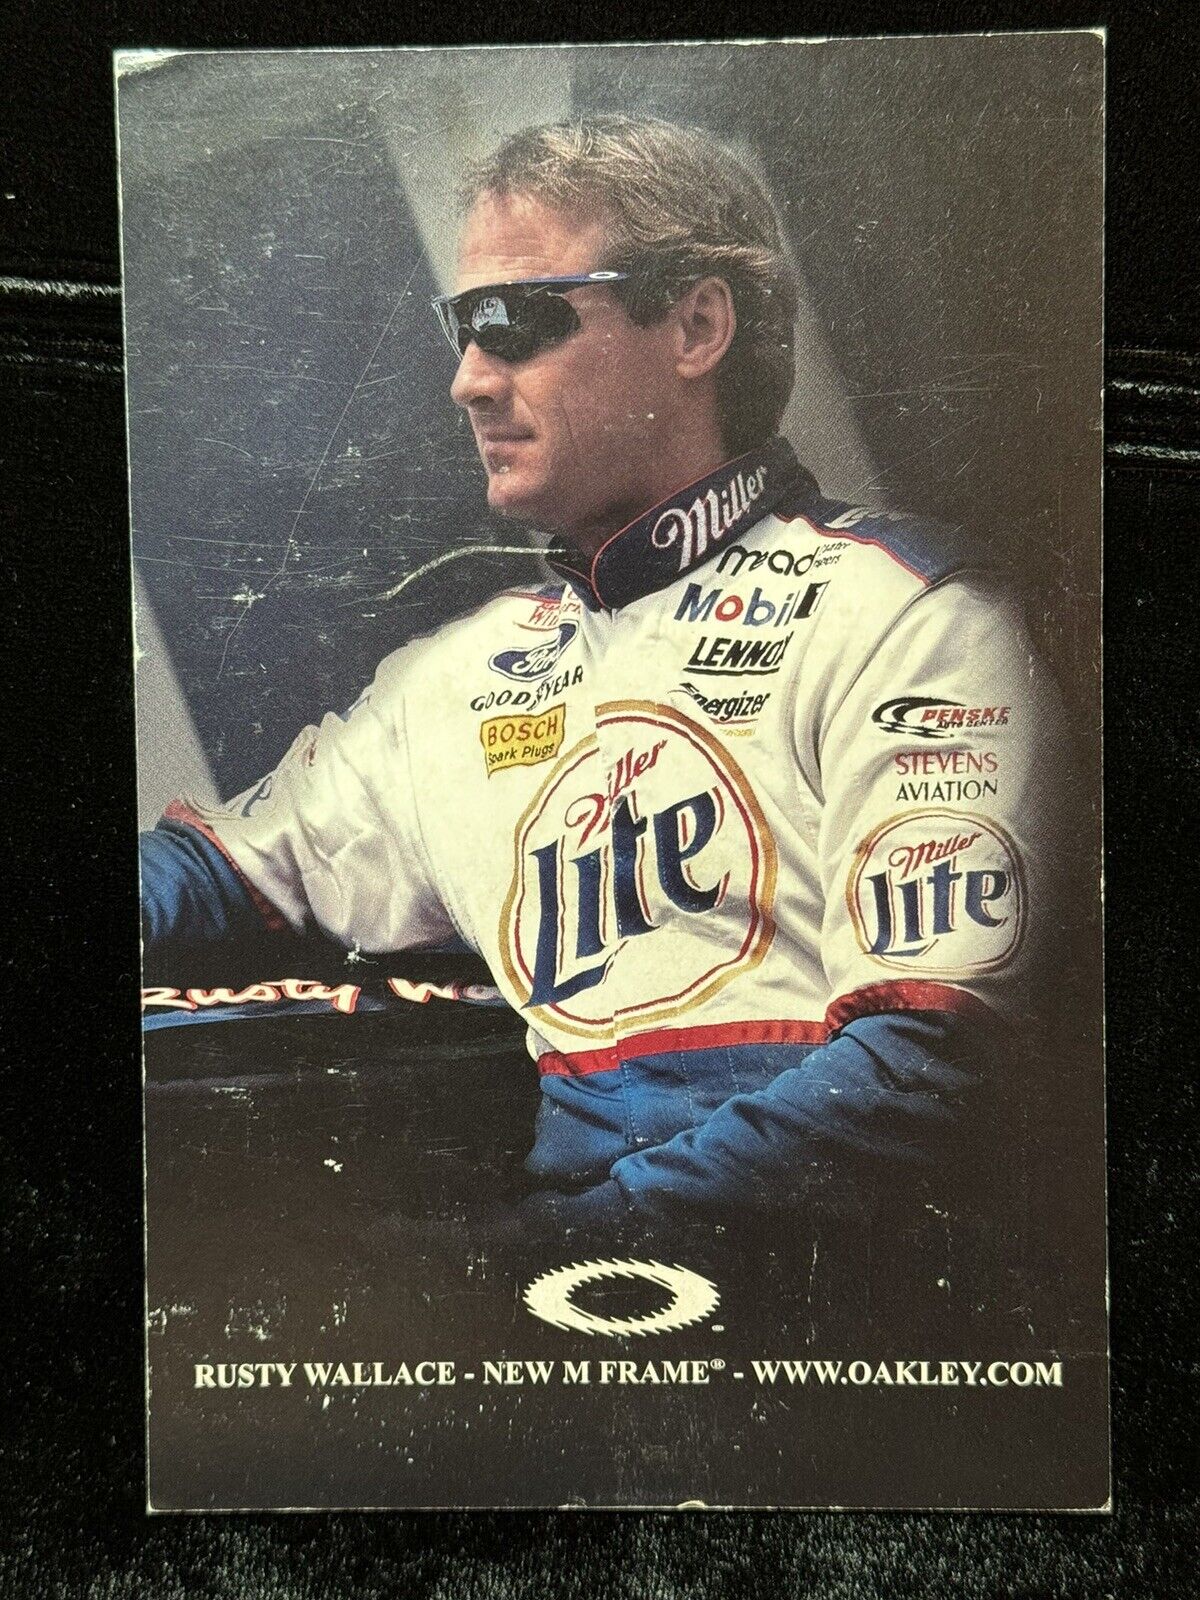 OAKLEY 1999 RUSTY WALLACE M-FRAME Dealer Promo Display Card New Old Stock